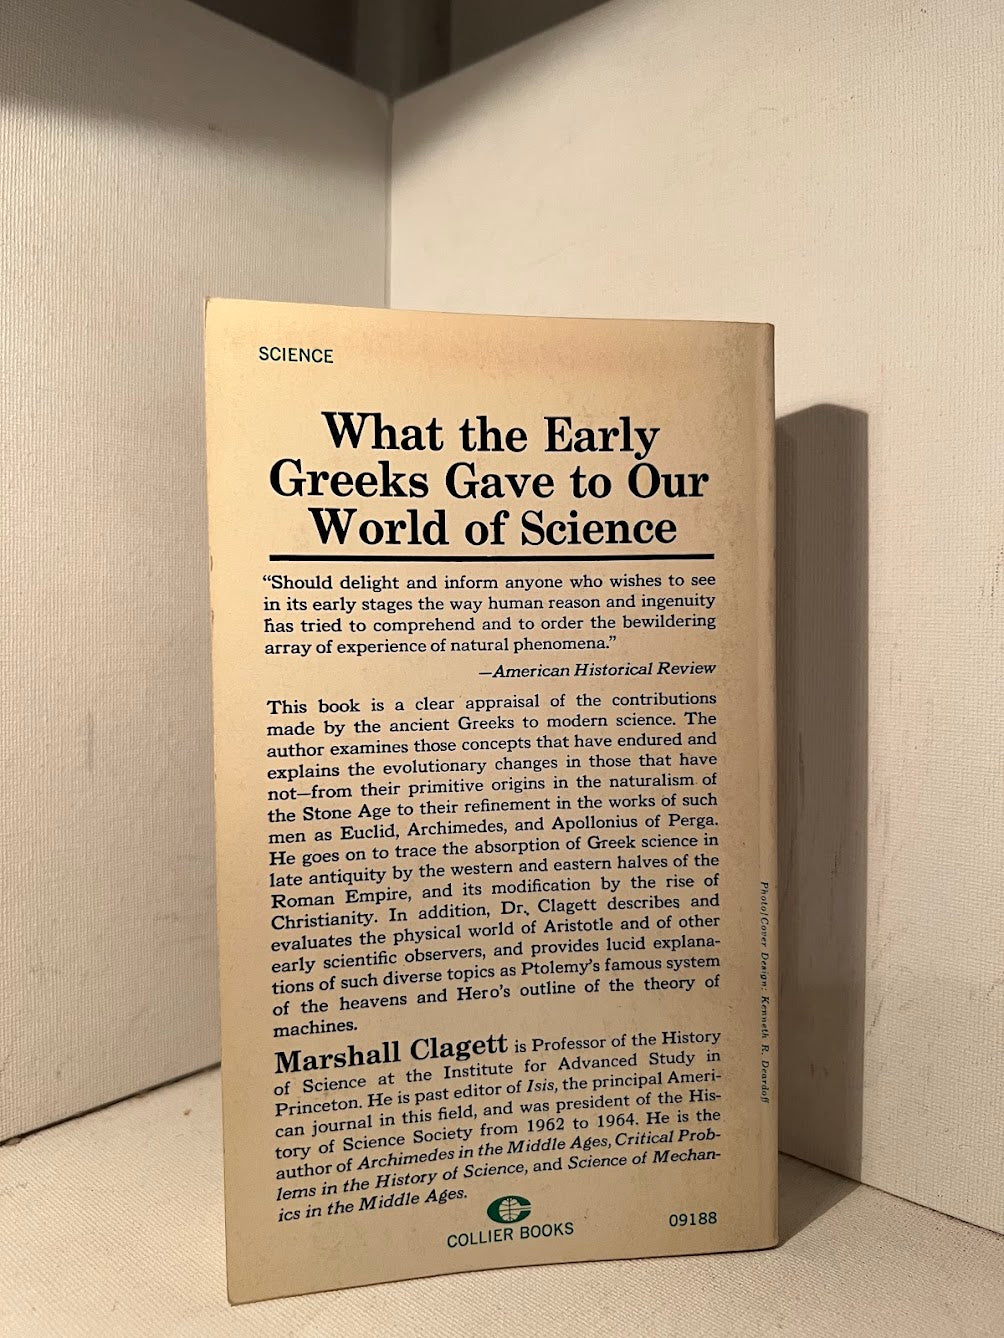 Greek Science in Antiquity by Marshall Clagett